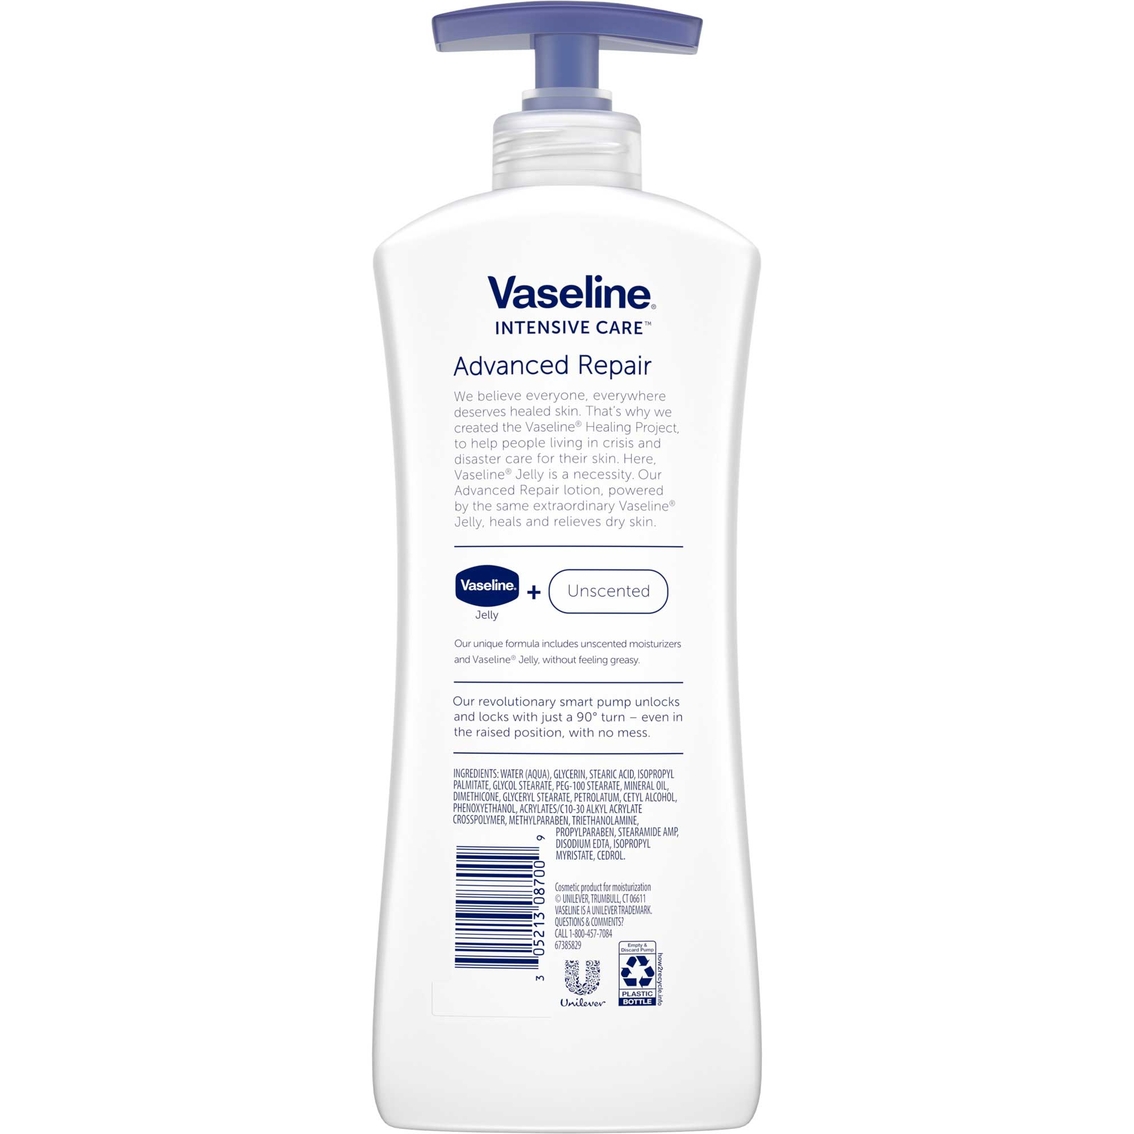 Vaseline Intensive Care Advanced Repair Unscented Healing Moisture Lotion 20.3 oz. - Image 2 of 2